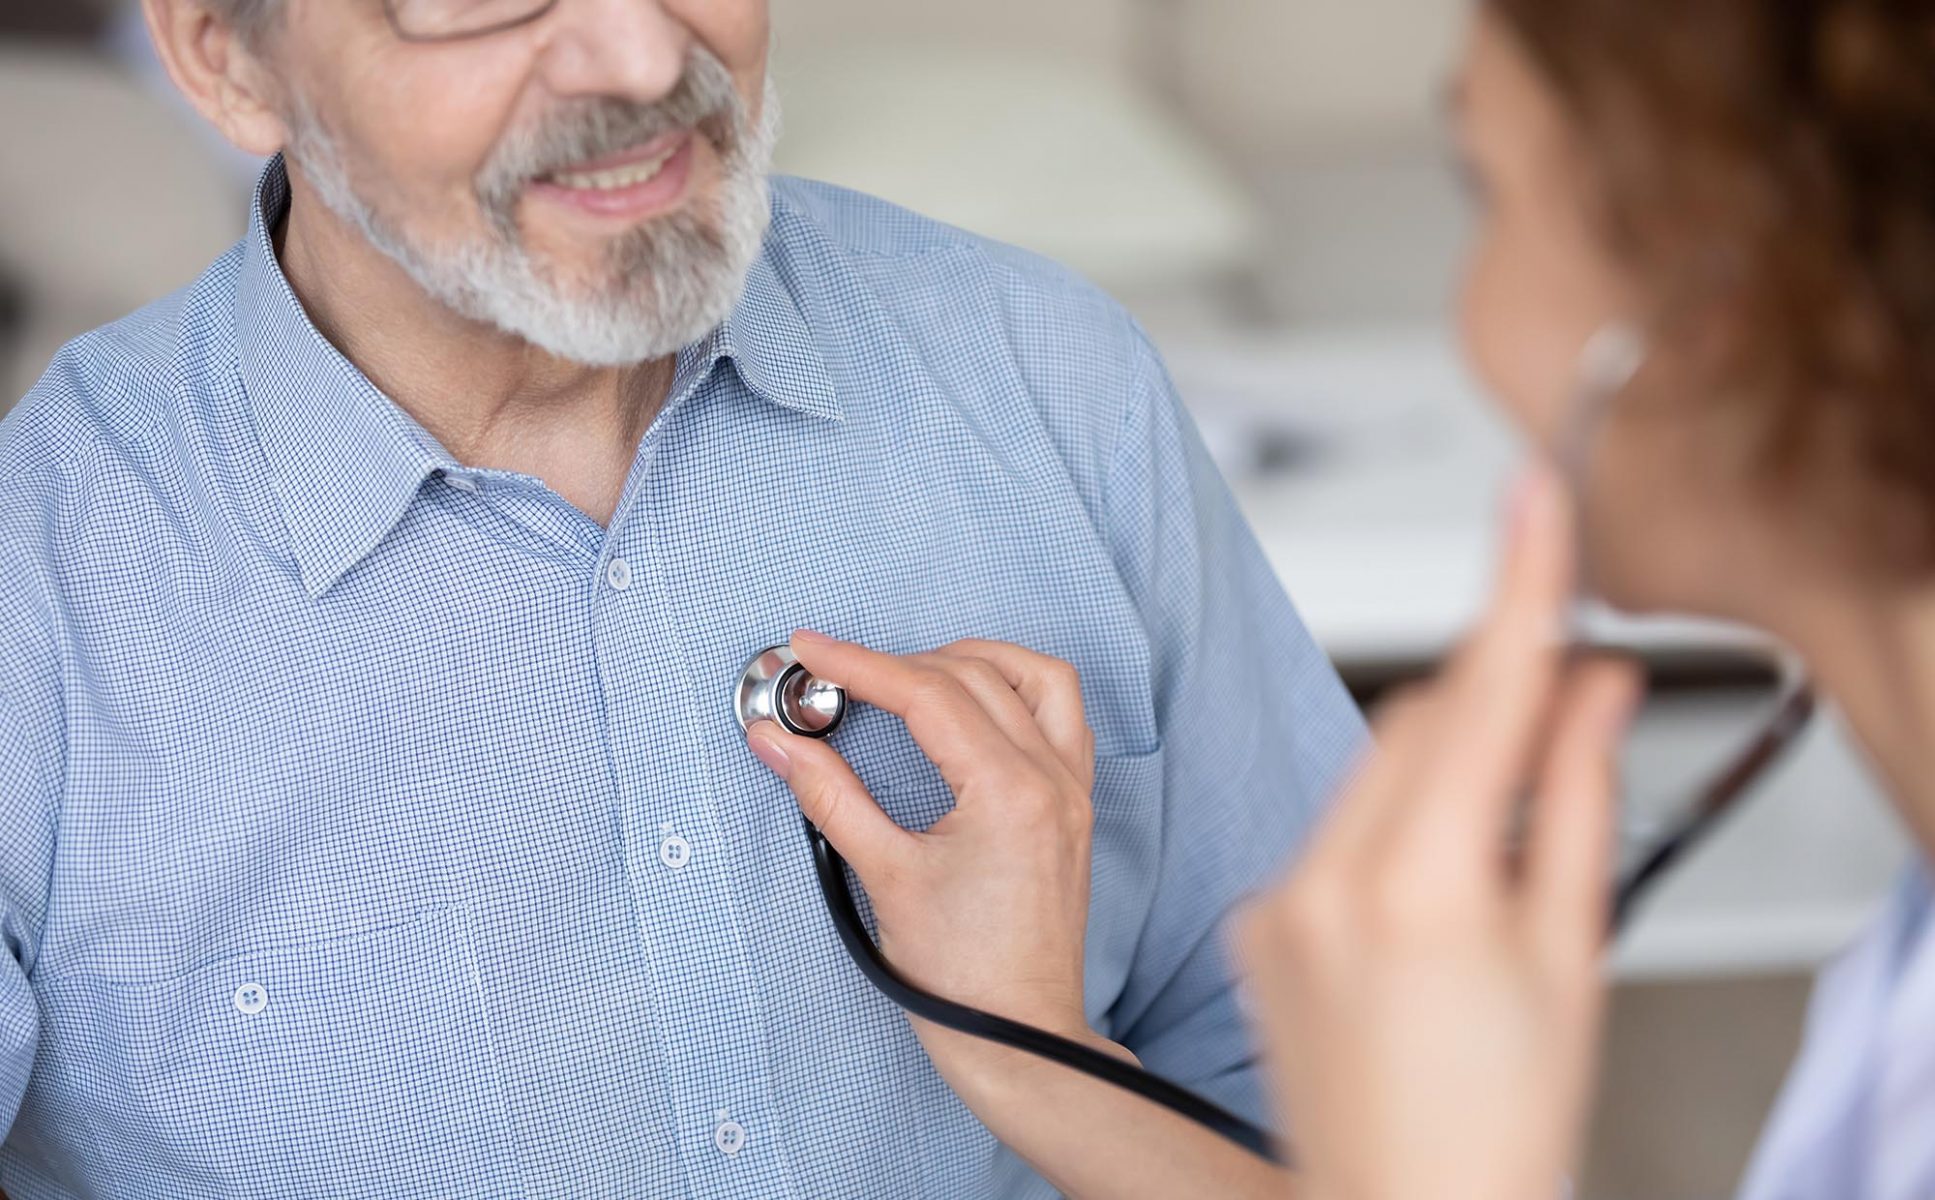 Doctor listening to senior man's heart with stethoscope